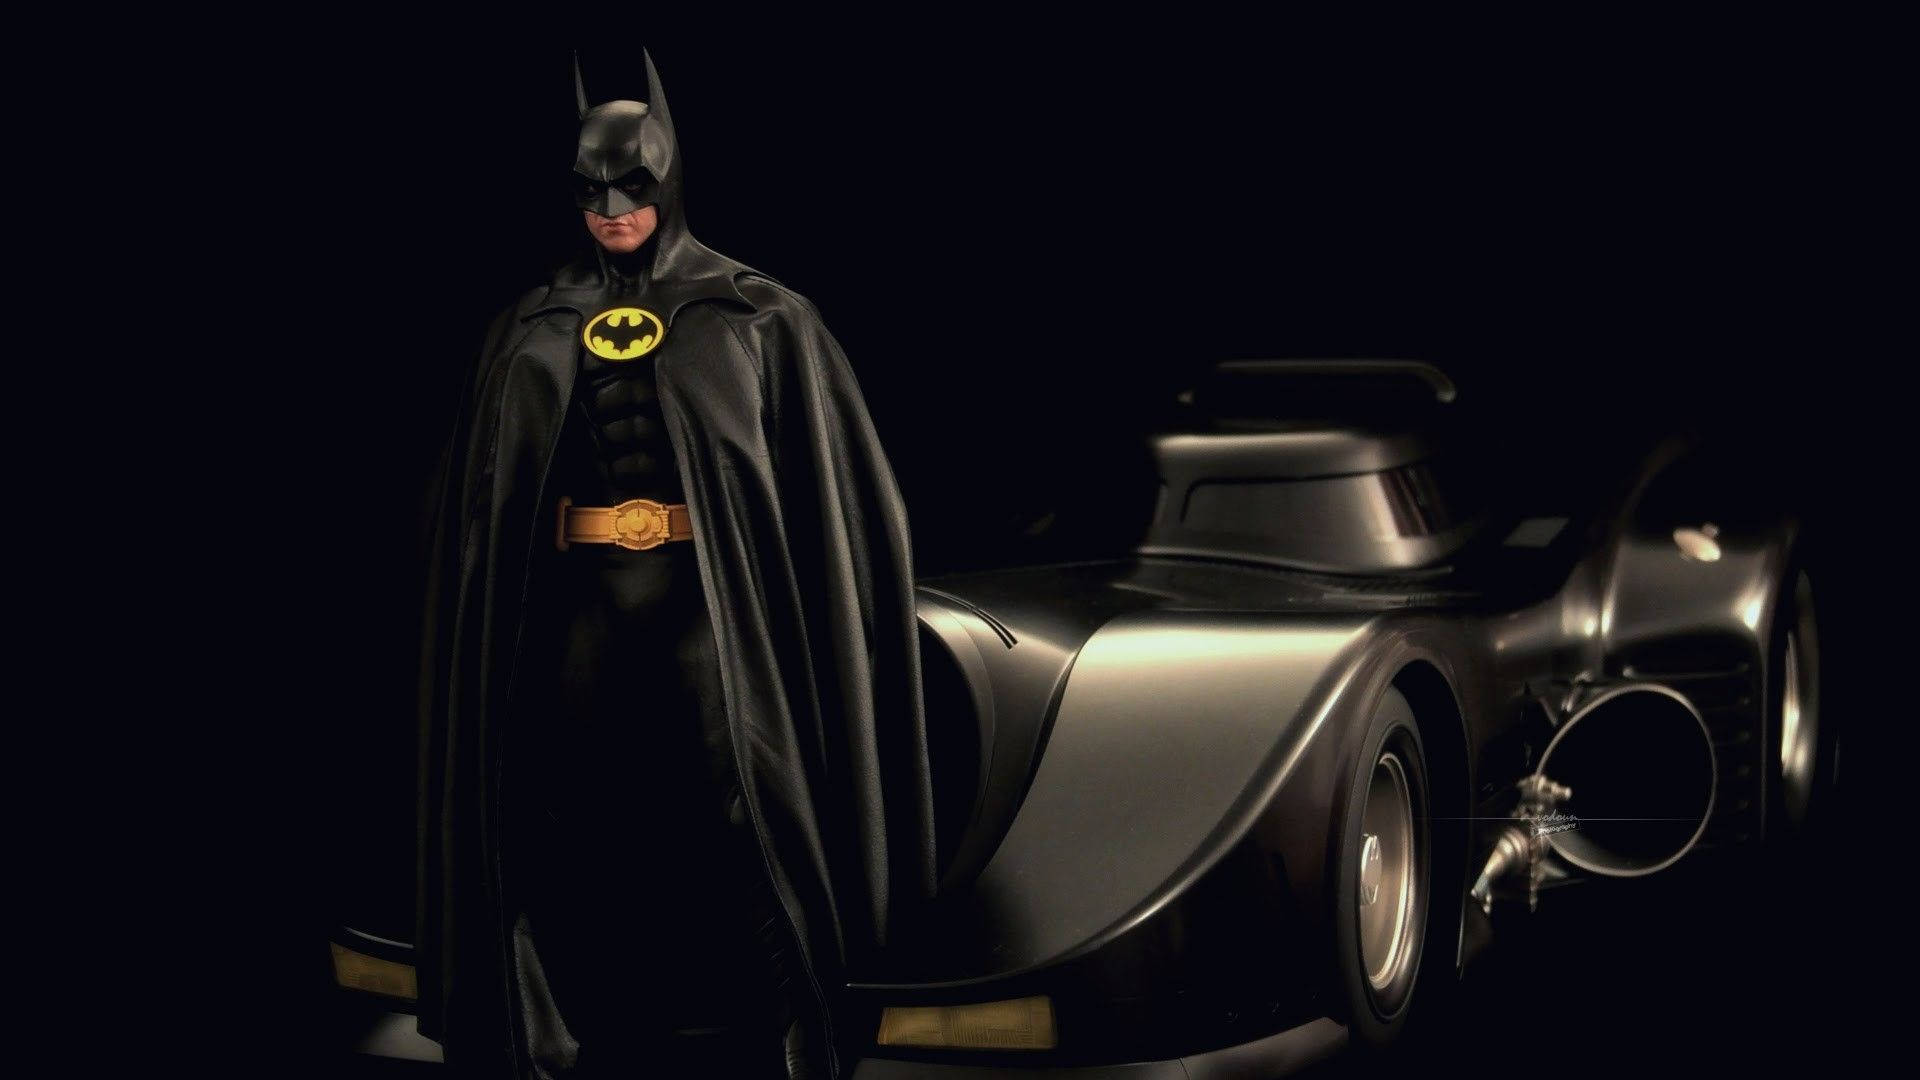 Batman And Batmobile In Darkness Background